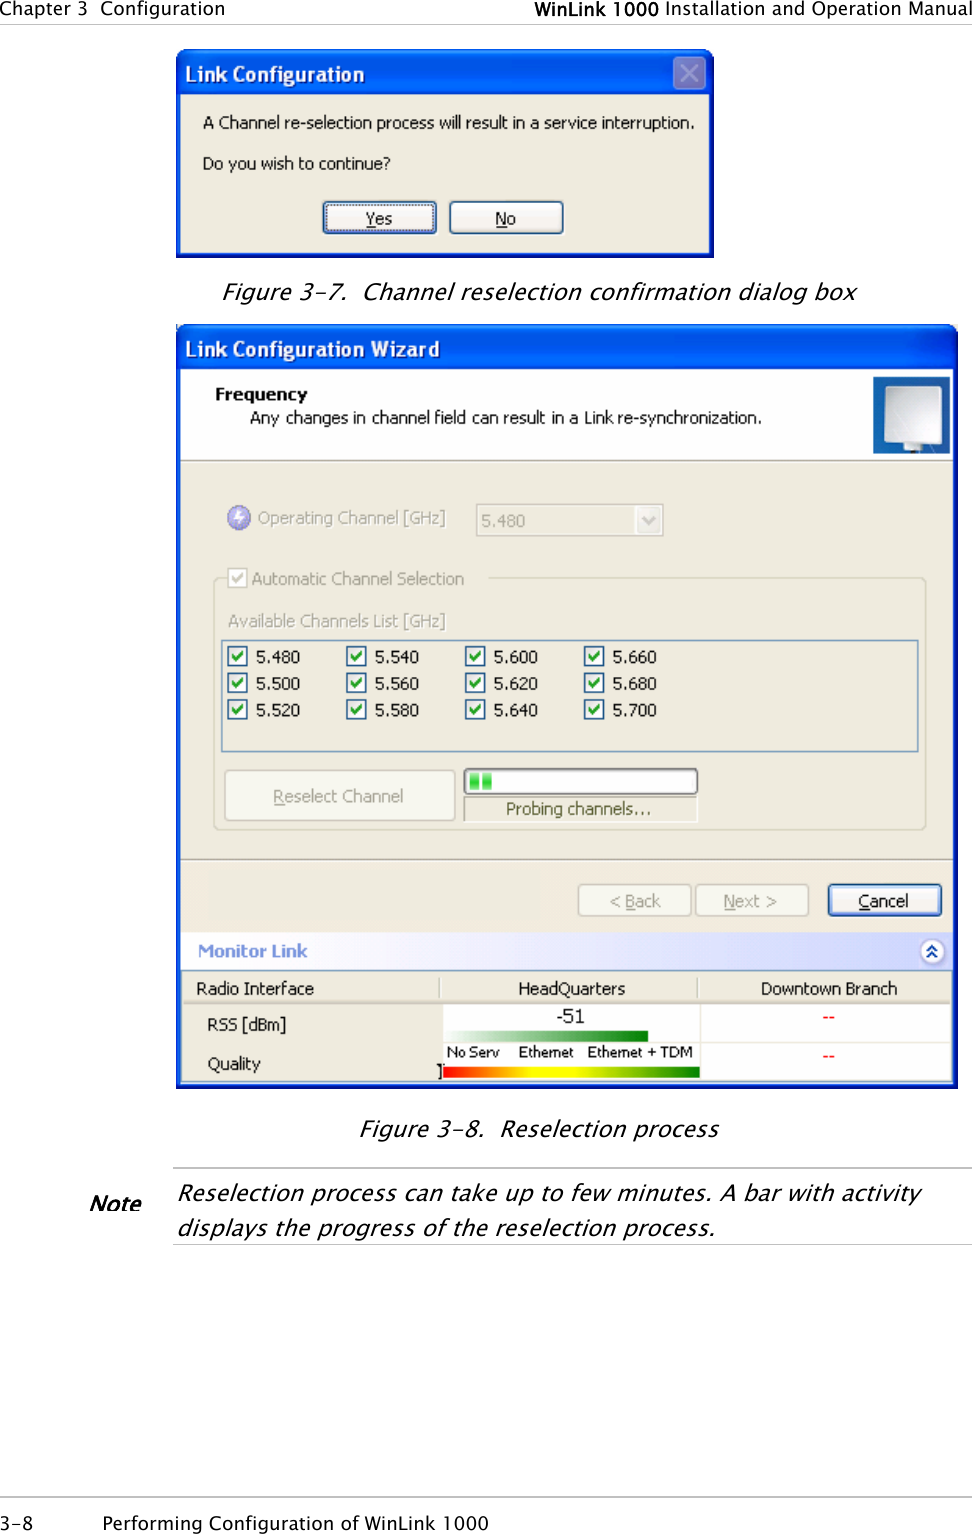 Chapter 3  Configuration  WinLink 1000 Installation and Operation Manual  Figure 3-7.  Channel reselection confirmation dialog box  Figure 3-8.  Reselection process  Reselection process can take up to few minutes. A bar with activity displays the progress of the reselection process.   Note3-8  Performing Configuration of WinLink 1000  